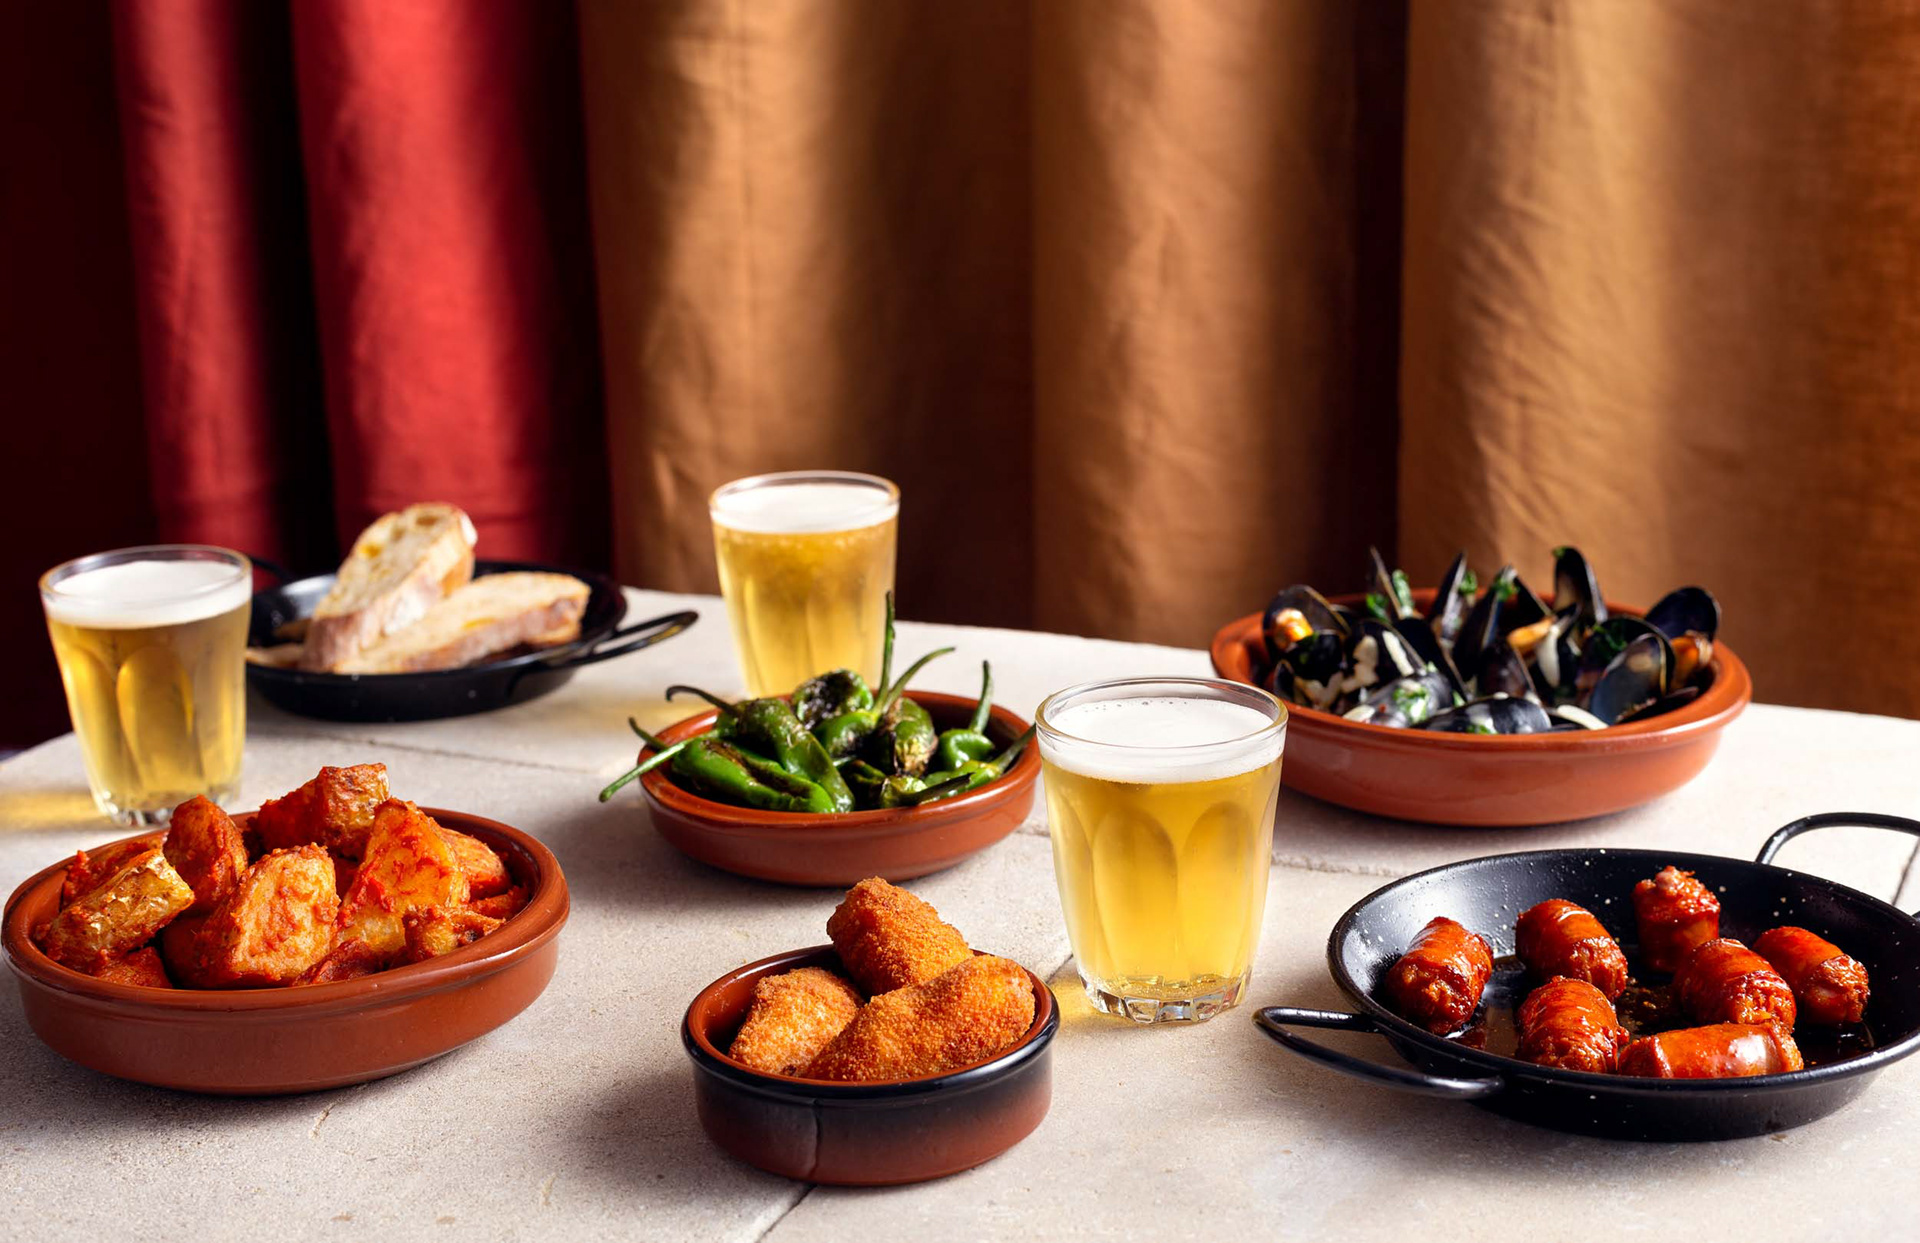 ‘Dine Smarter, Not Harder’: The Tapas Rule You Need To Know Before Going To Spain